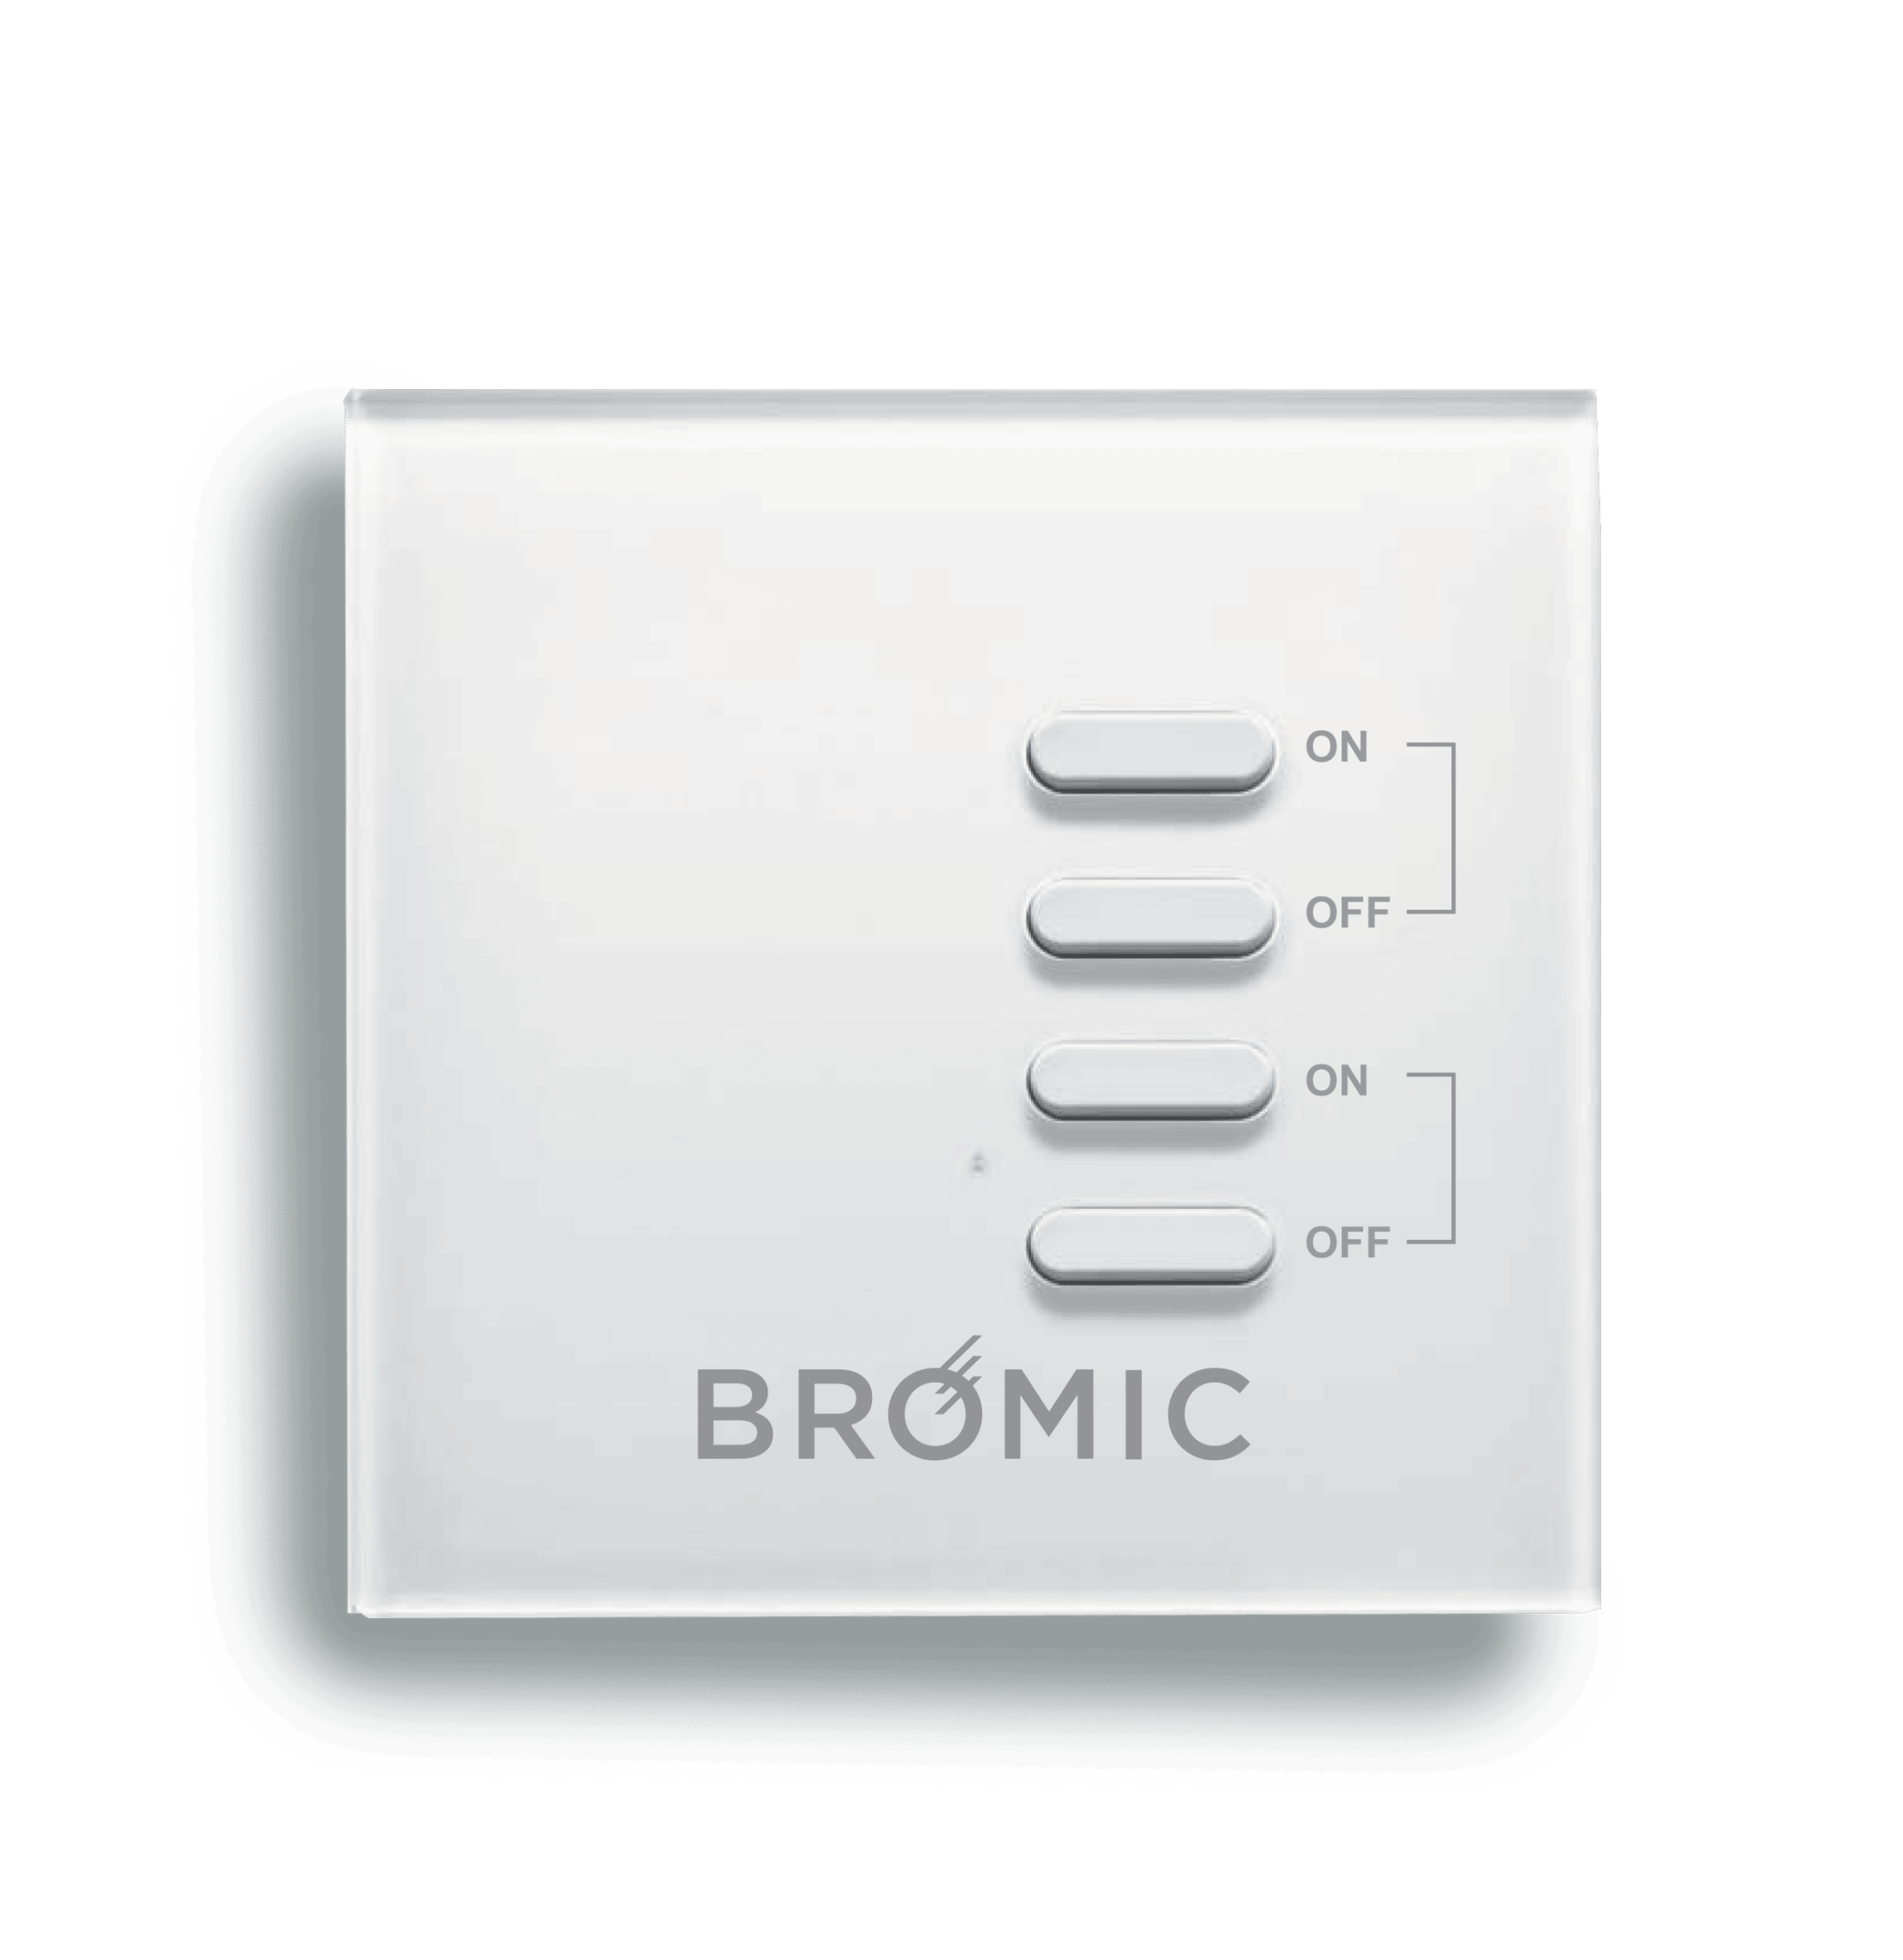 Bromic Heating Wireless On/Off Controller